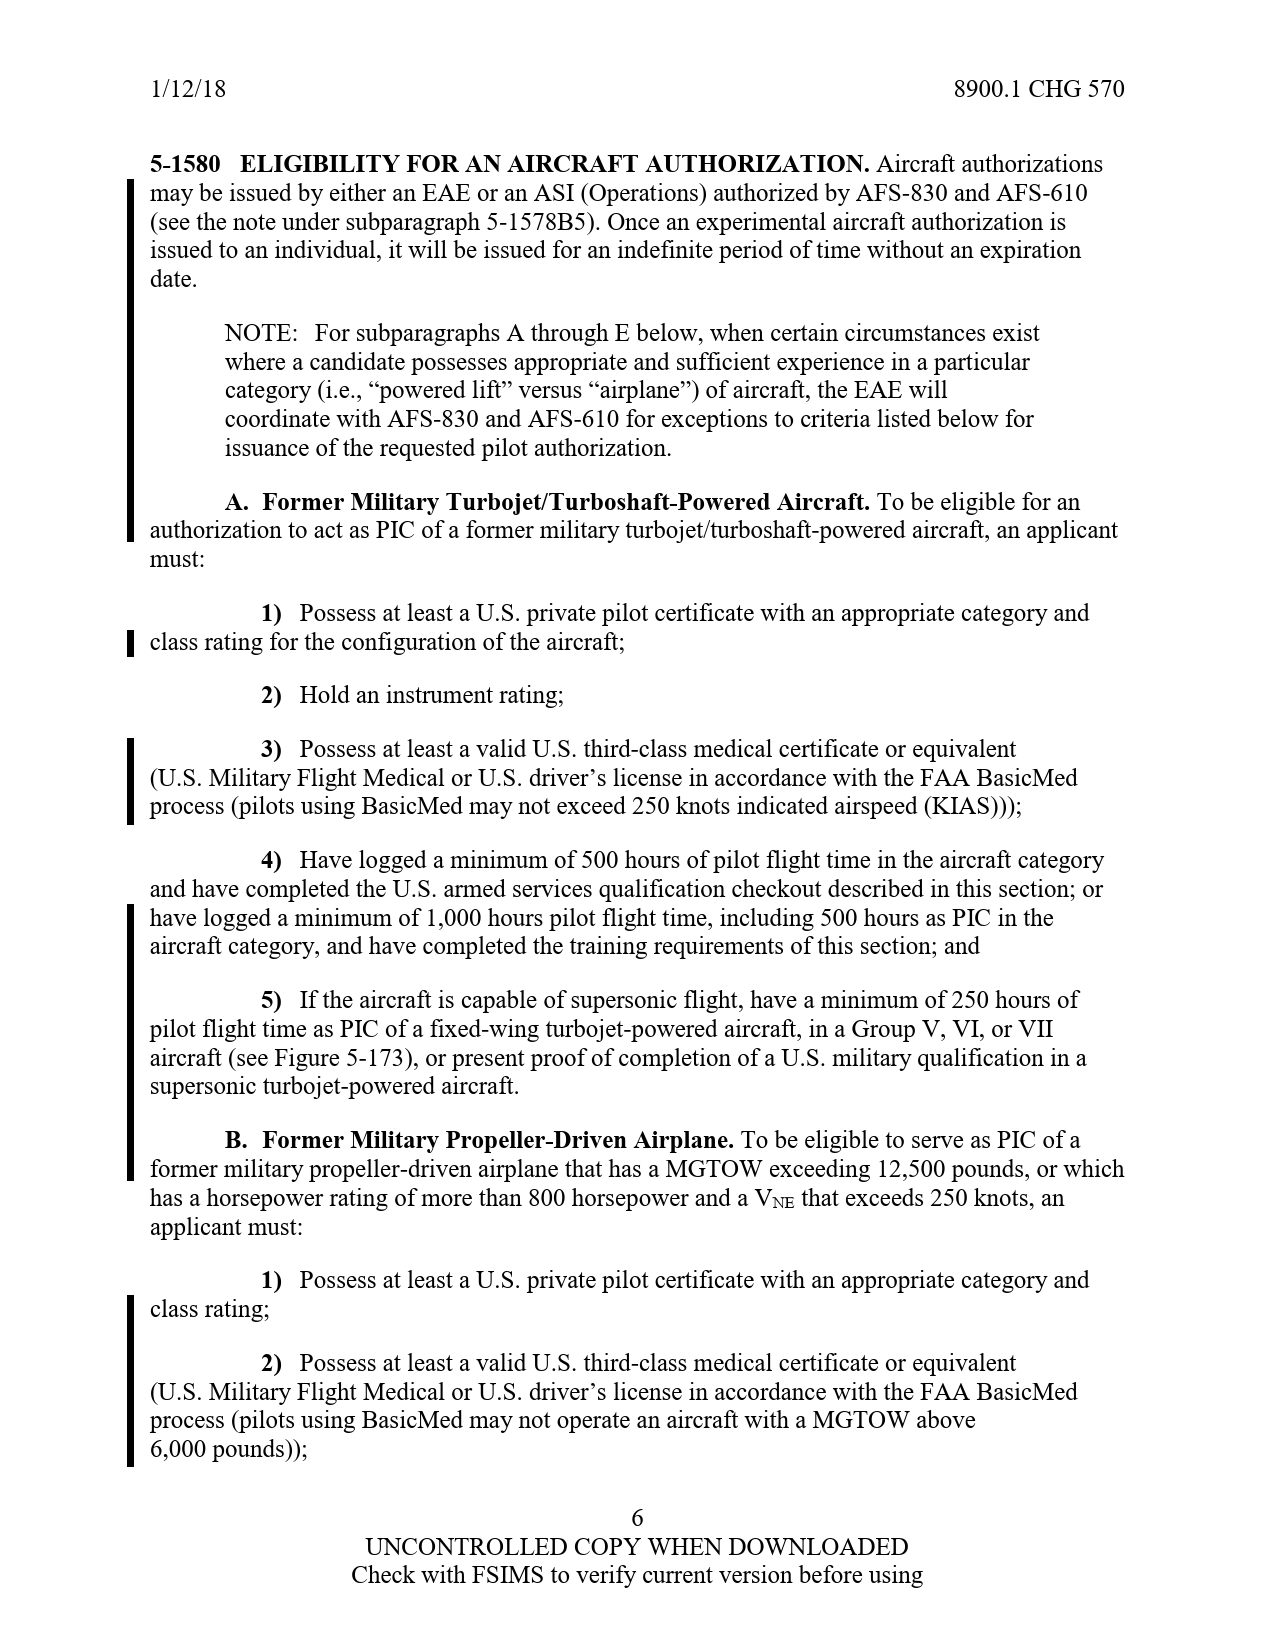 Sample page 6 from AirCorps Library document: T-28B/C/D Fennec Pilot Qualifications in the USA